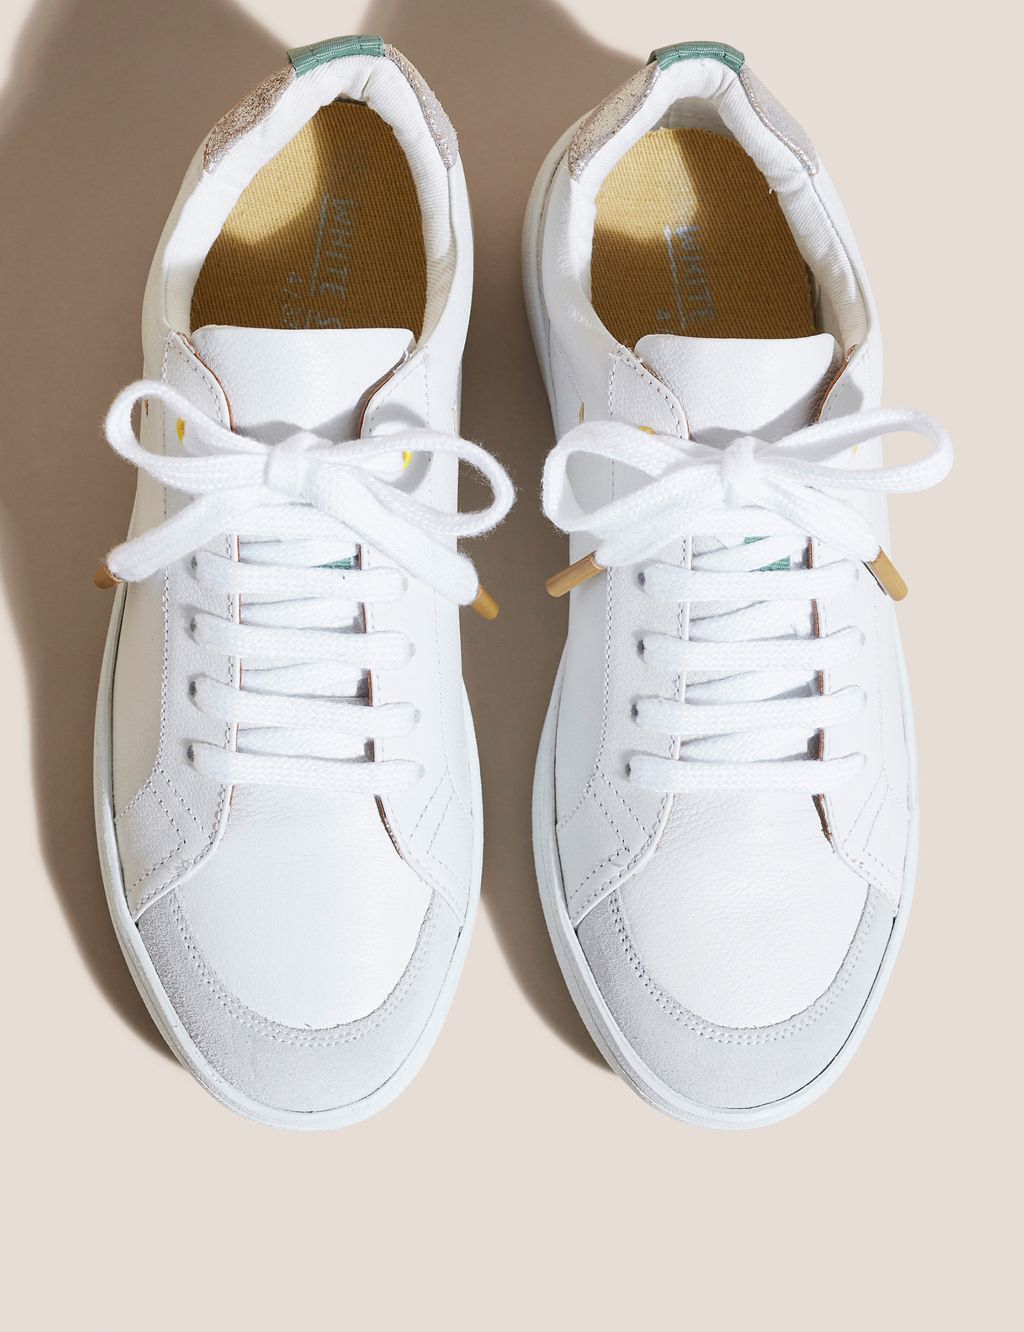 Leather Lace Up Trainers image 4